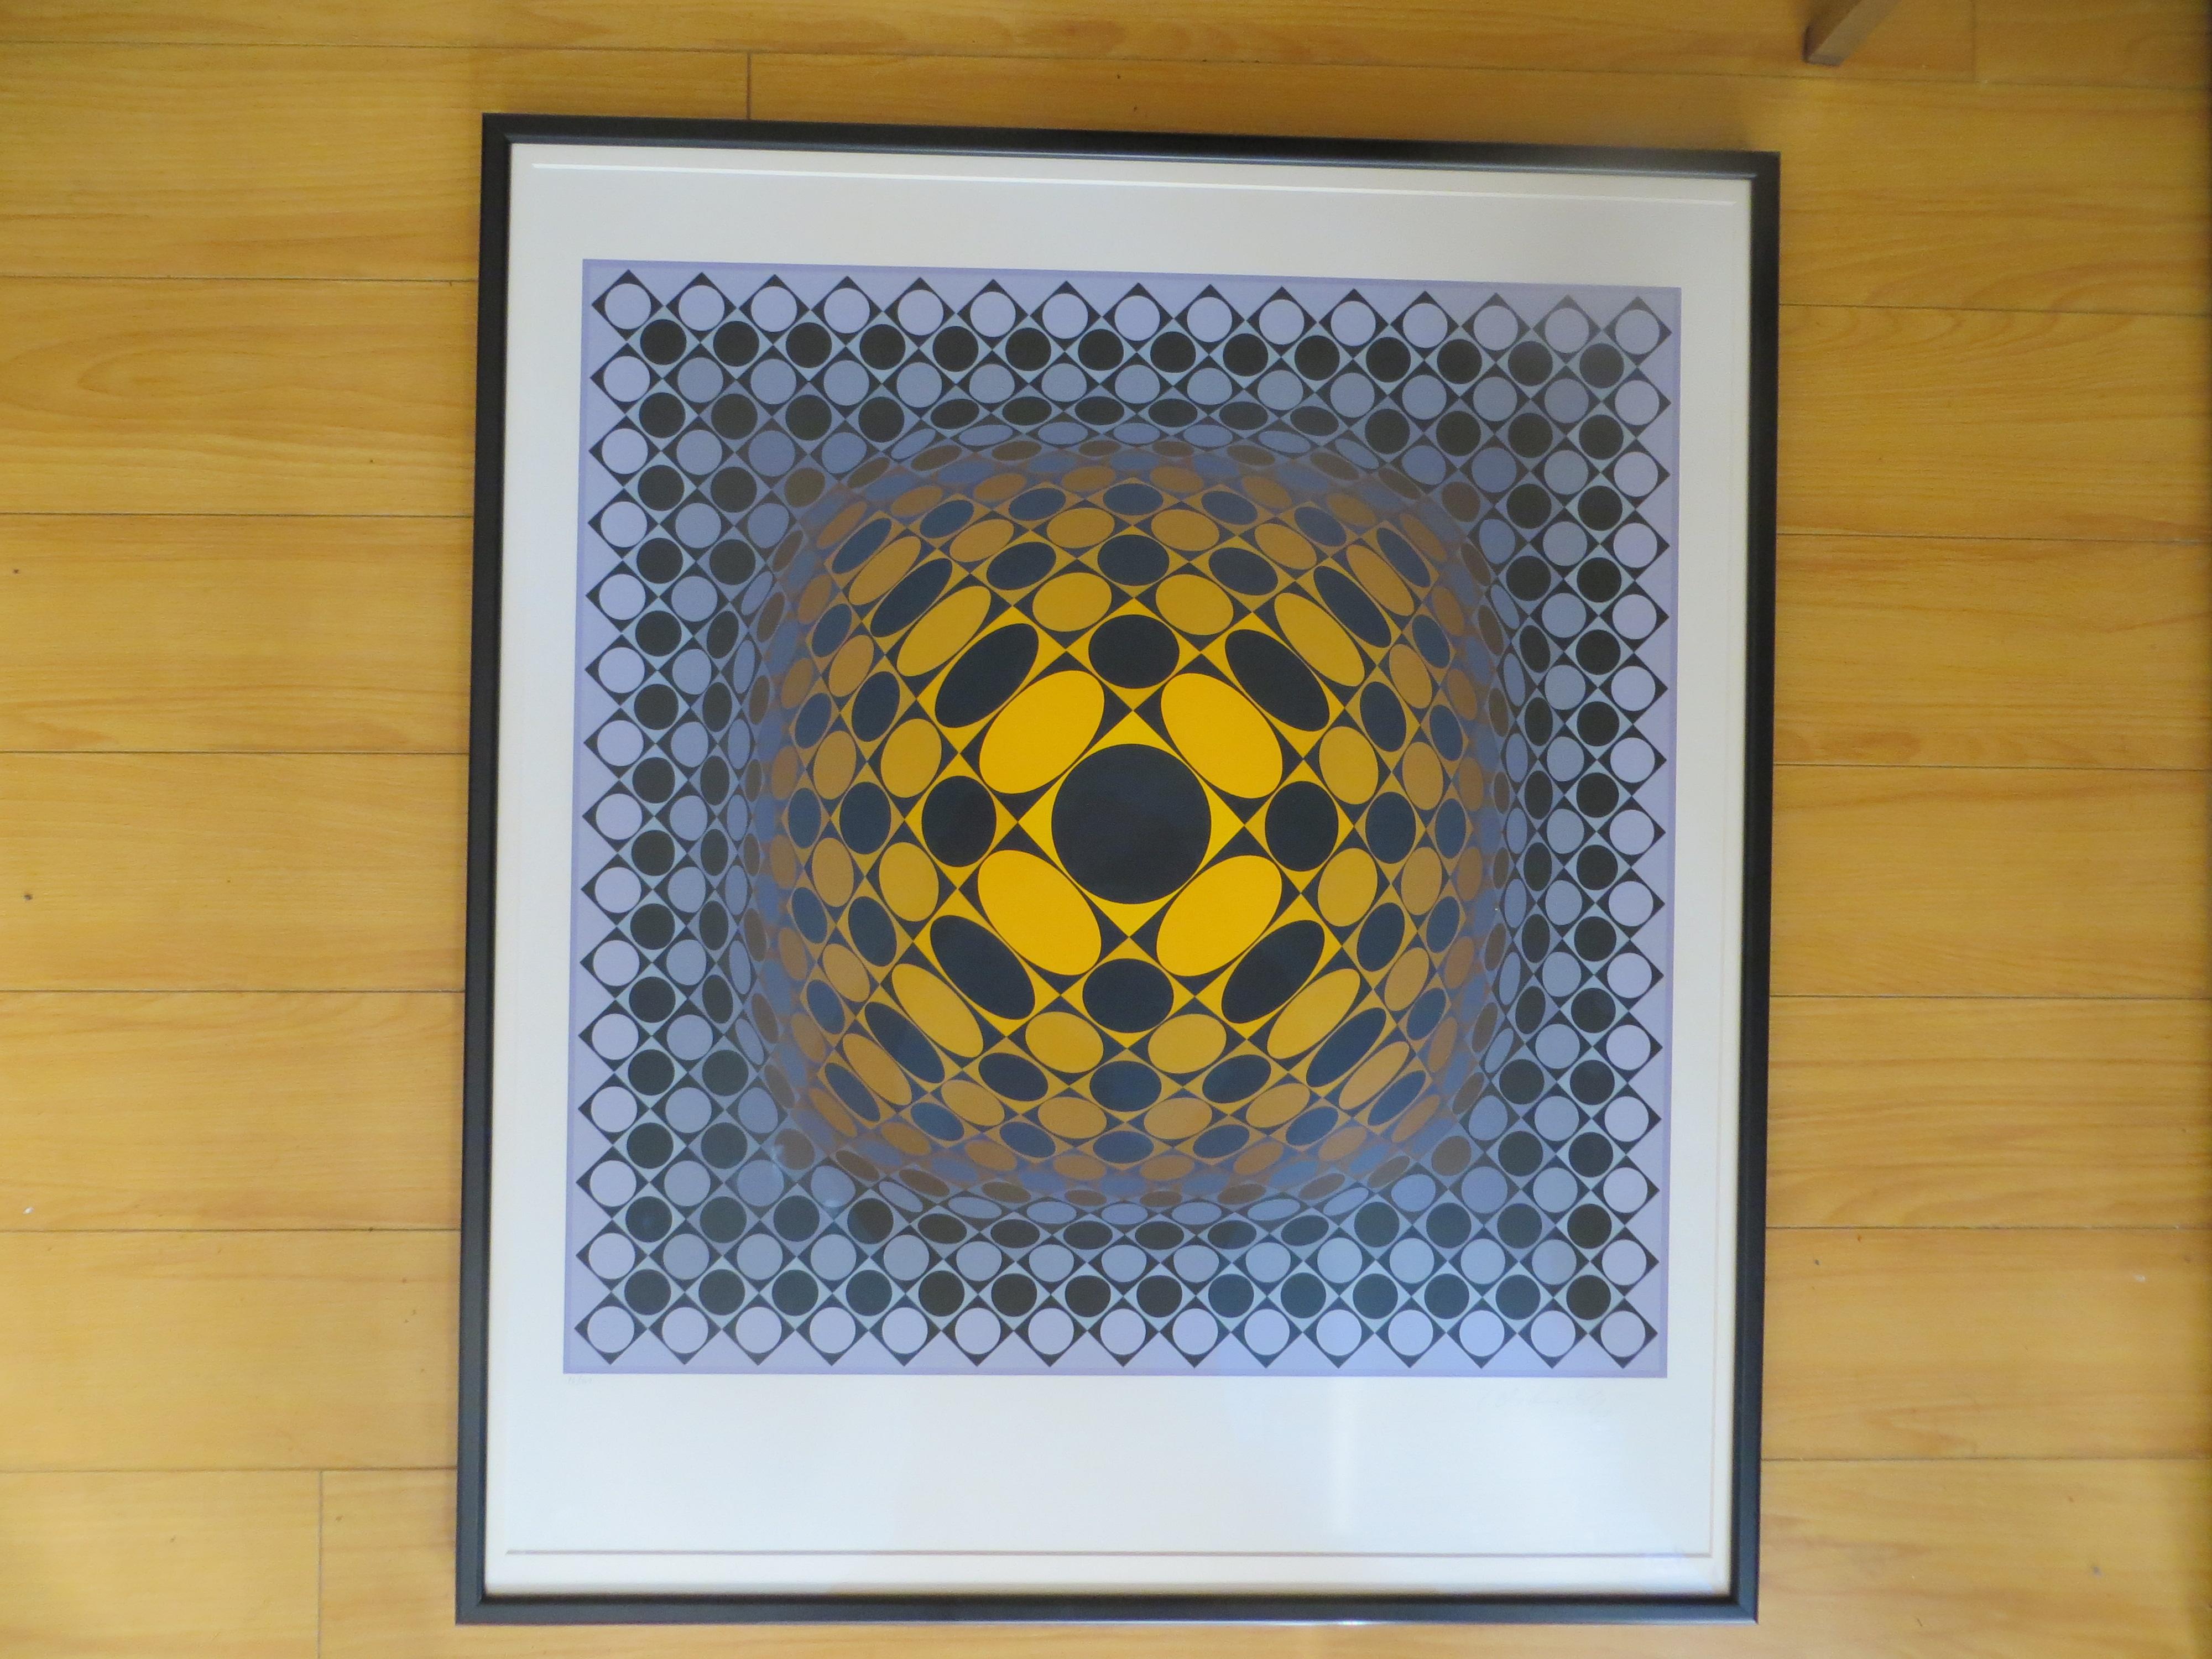 How many artworks did Victor Vasarely make?